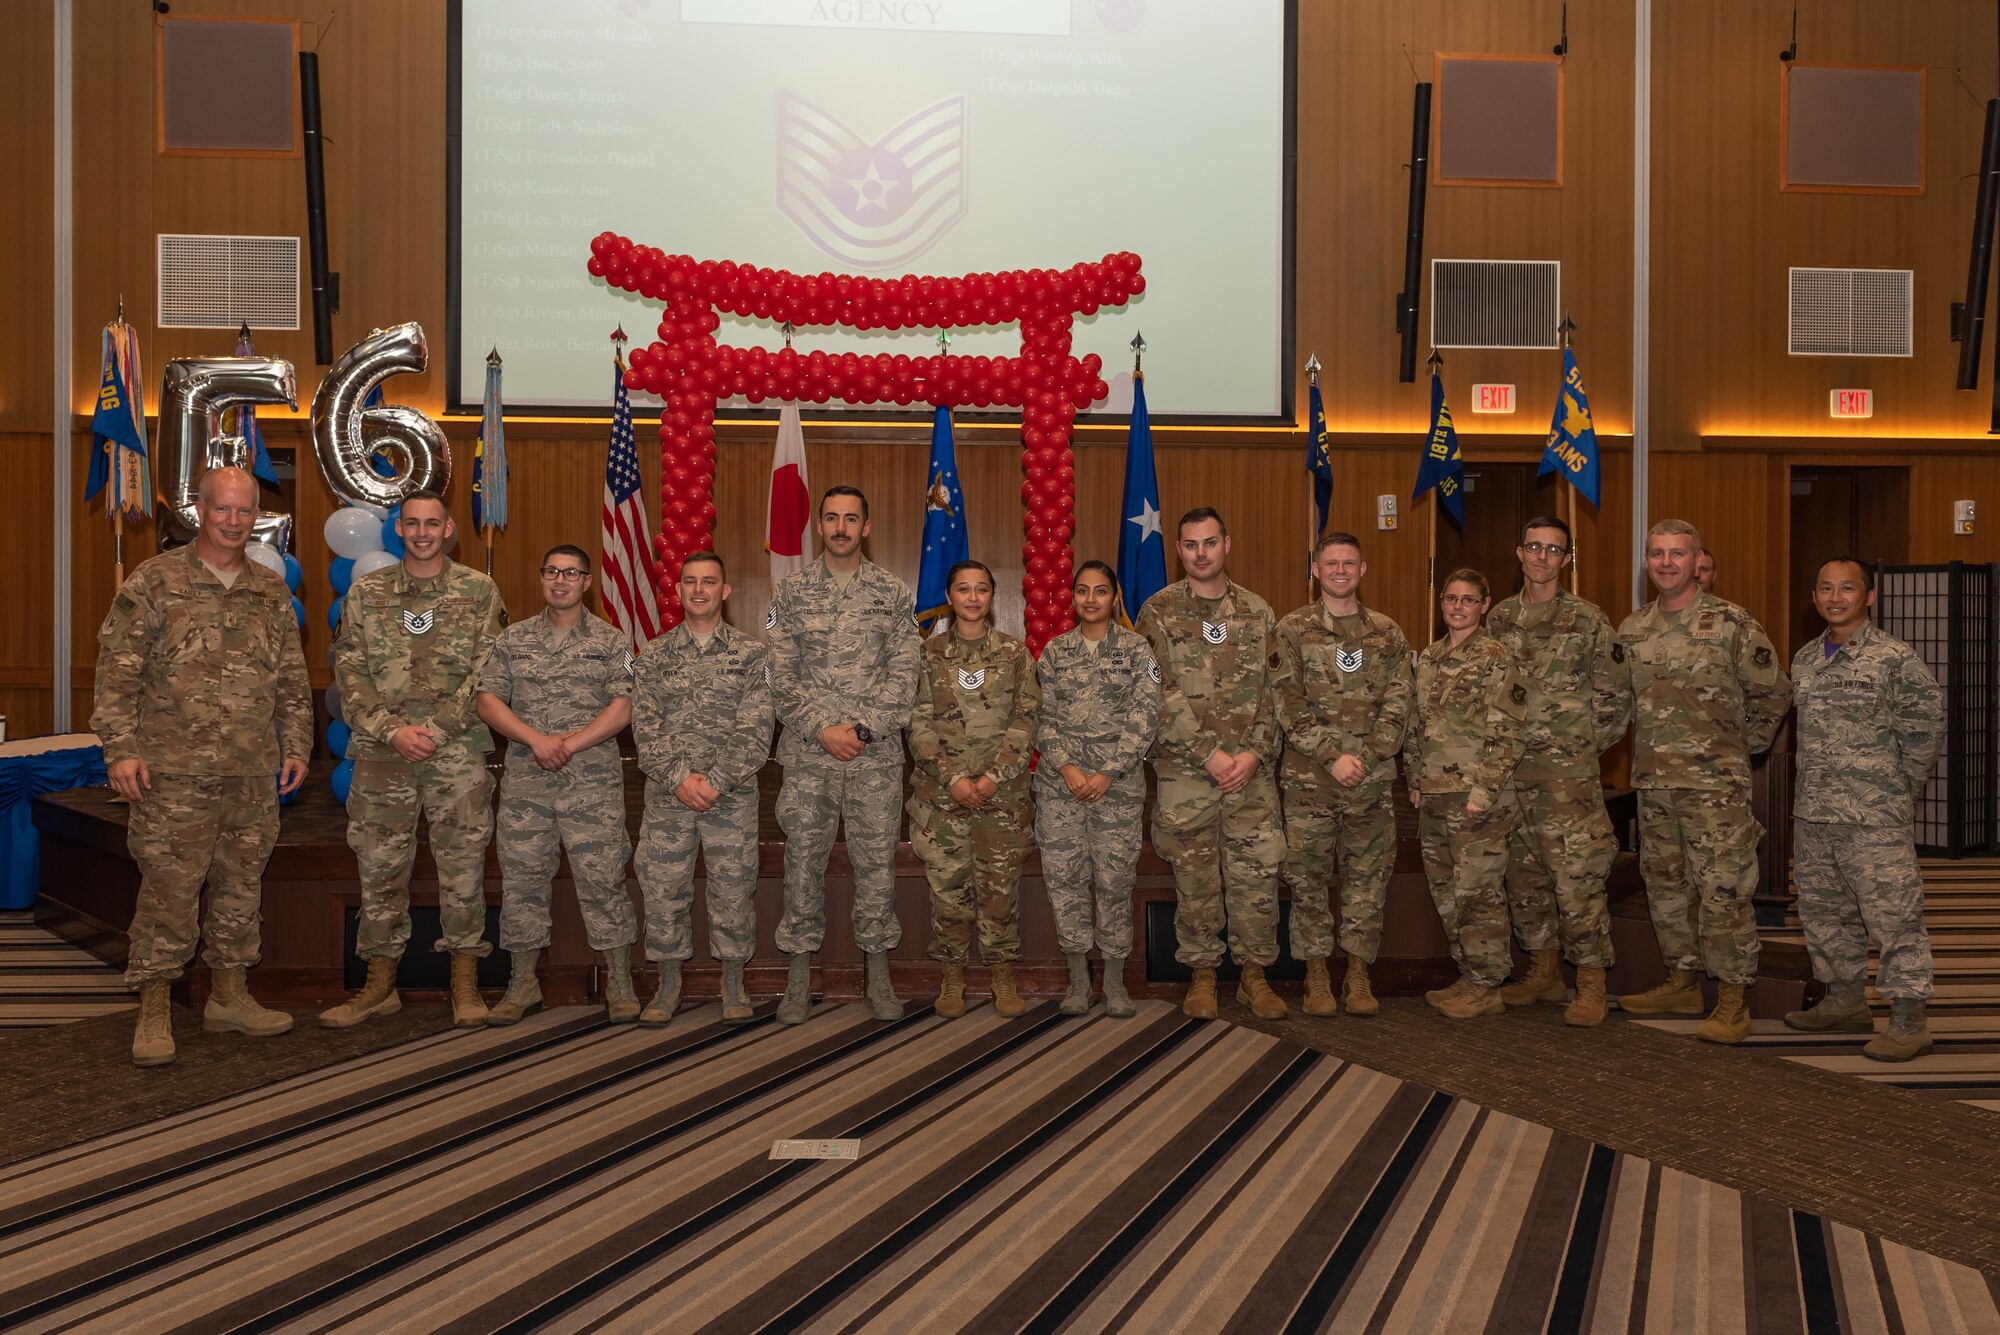 More than 250 staff sergeants from around the 18th Wing celebrate their promotion to technical sergeant on Kadena Air Base, July 19, 2019. The promotees are charged with being their organizations’ technical experts, and must continuously strive to further their development as technicians, supervisors and leaders through on- and off-duty professional development opportunities. They are responsible for their subordinates’ development and the effective accomplishment of all assigned tasks. They must ensure proper and effective use of all resources under their control to ensure the mission is effectively and efficiently accomplished. (U.S. Air Force photo by Airman 1st Class Matthew Seefeldt)